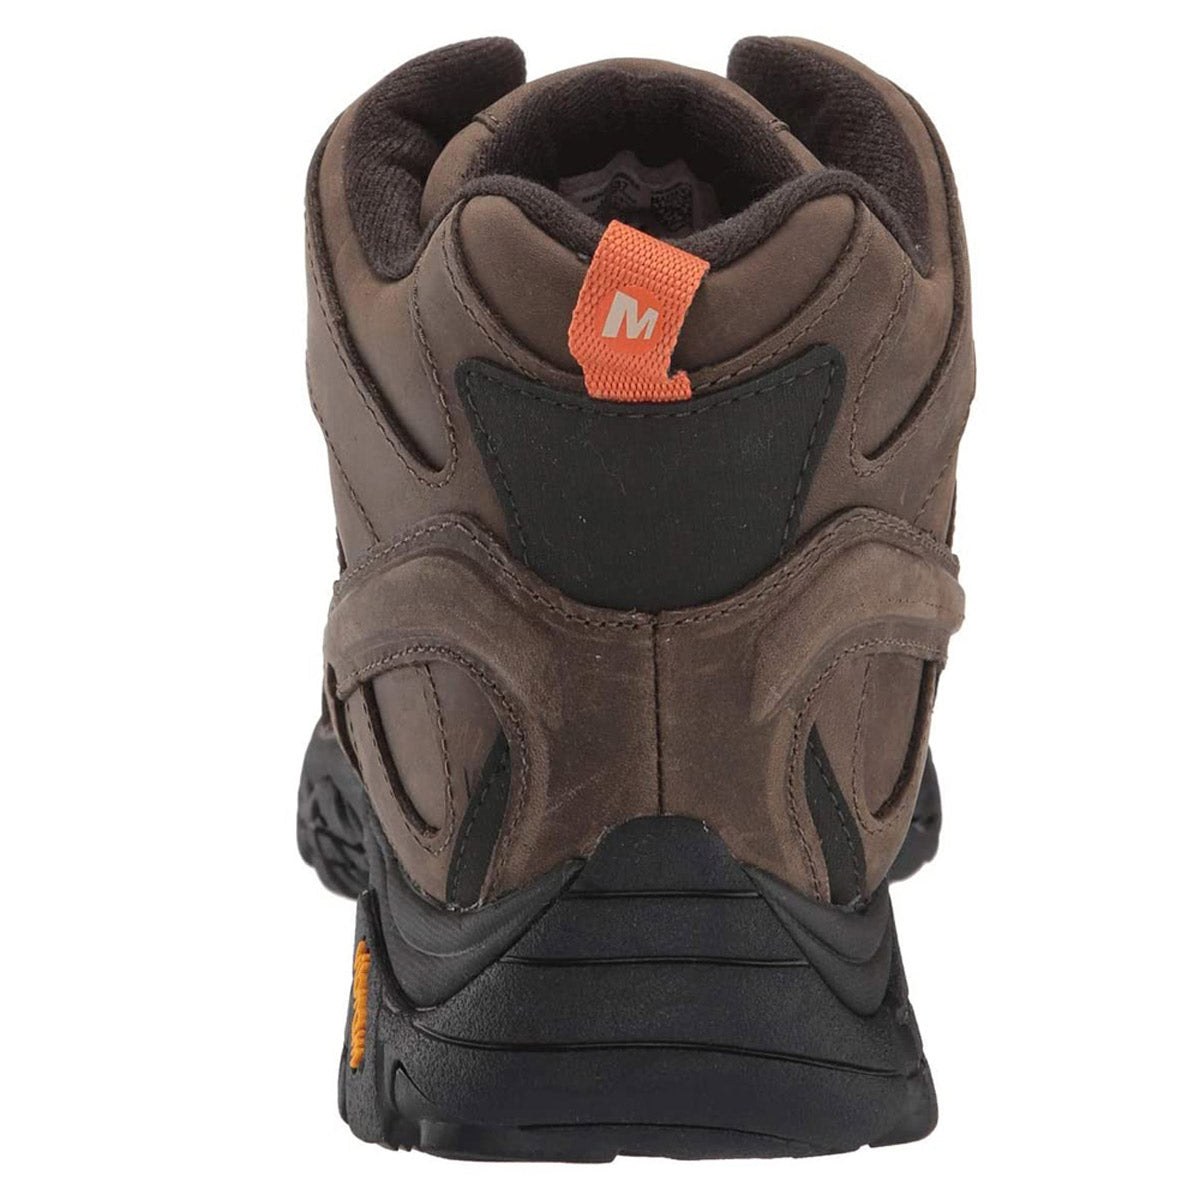 Replace Sentence: Rear view of a brown Merrell Moab 2 Prime Mid hiking boot showing its Vibram TC5+ tread and pull tab.
With: Rear view of a brown MERRELL MOAB 2 PRIME MID WP CANTEEN BROWN - MENS hiking boot showing its Vibram TC5+ tread and pull tab.